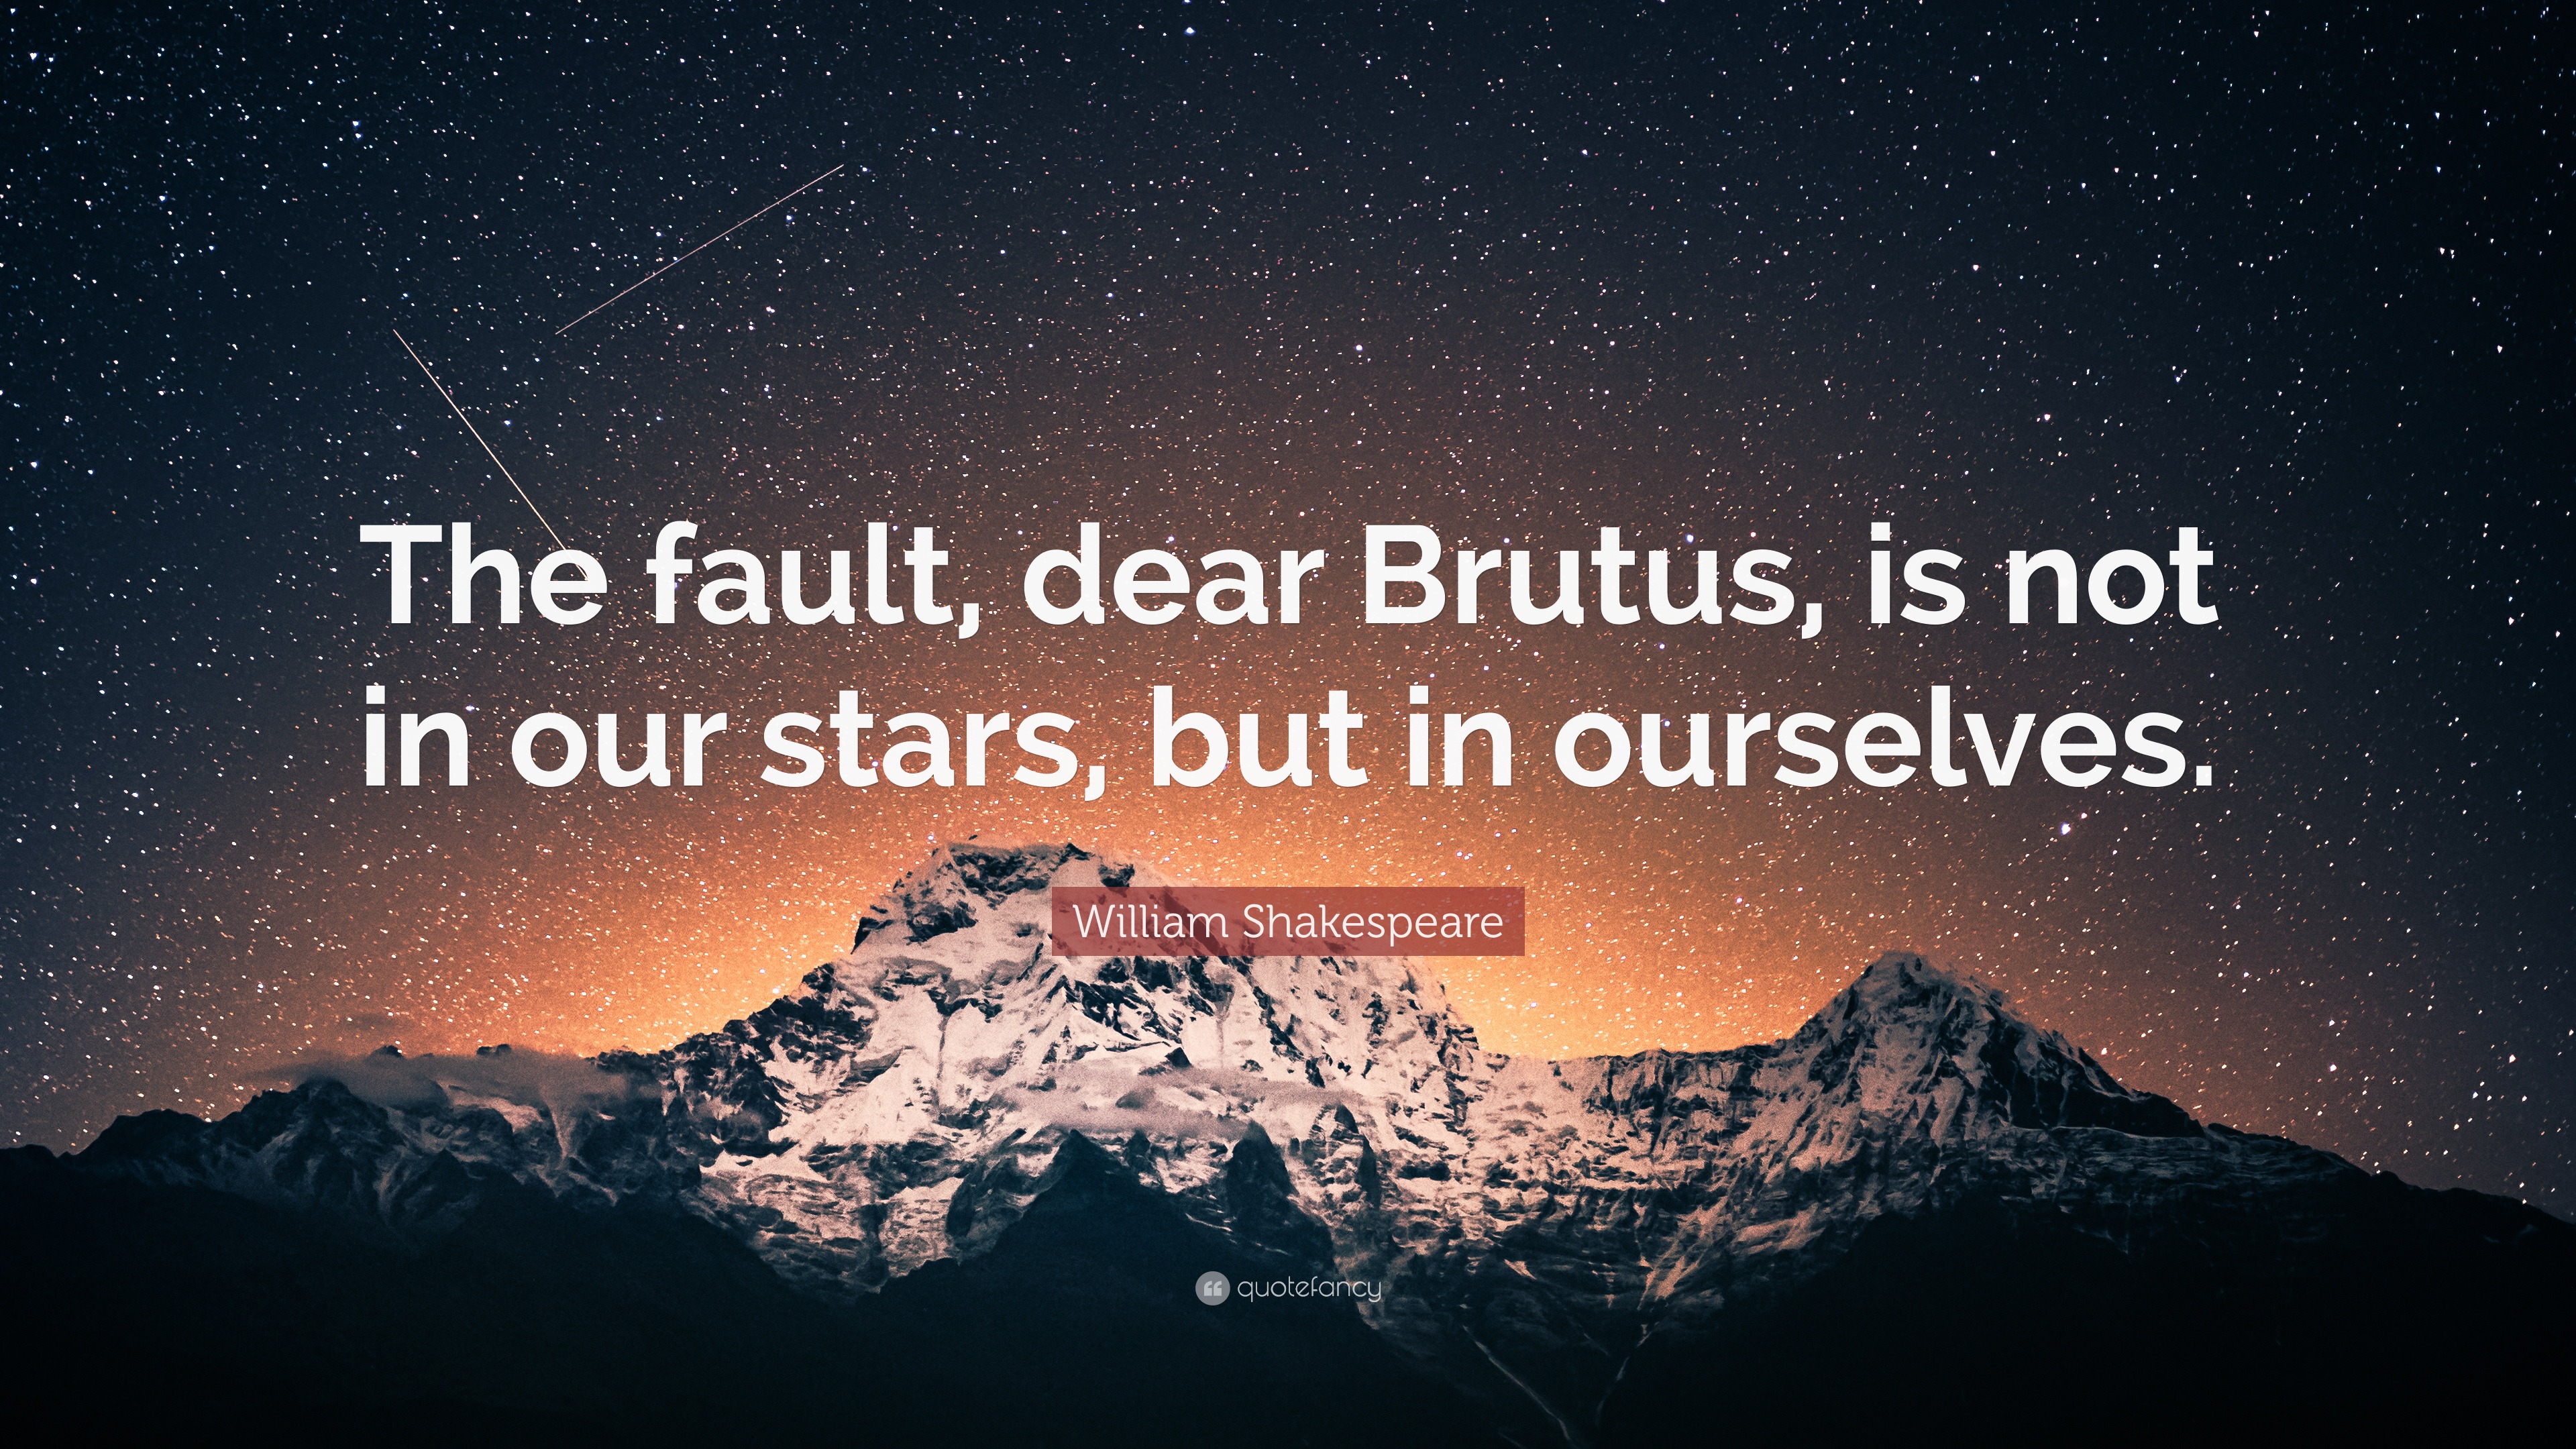 William Shakespeare Quote: “The fault, dear Brutus, is not in our stars